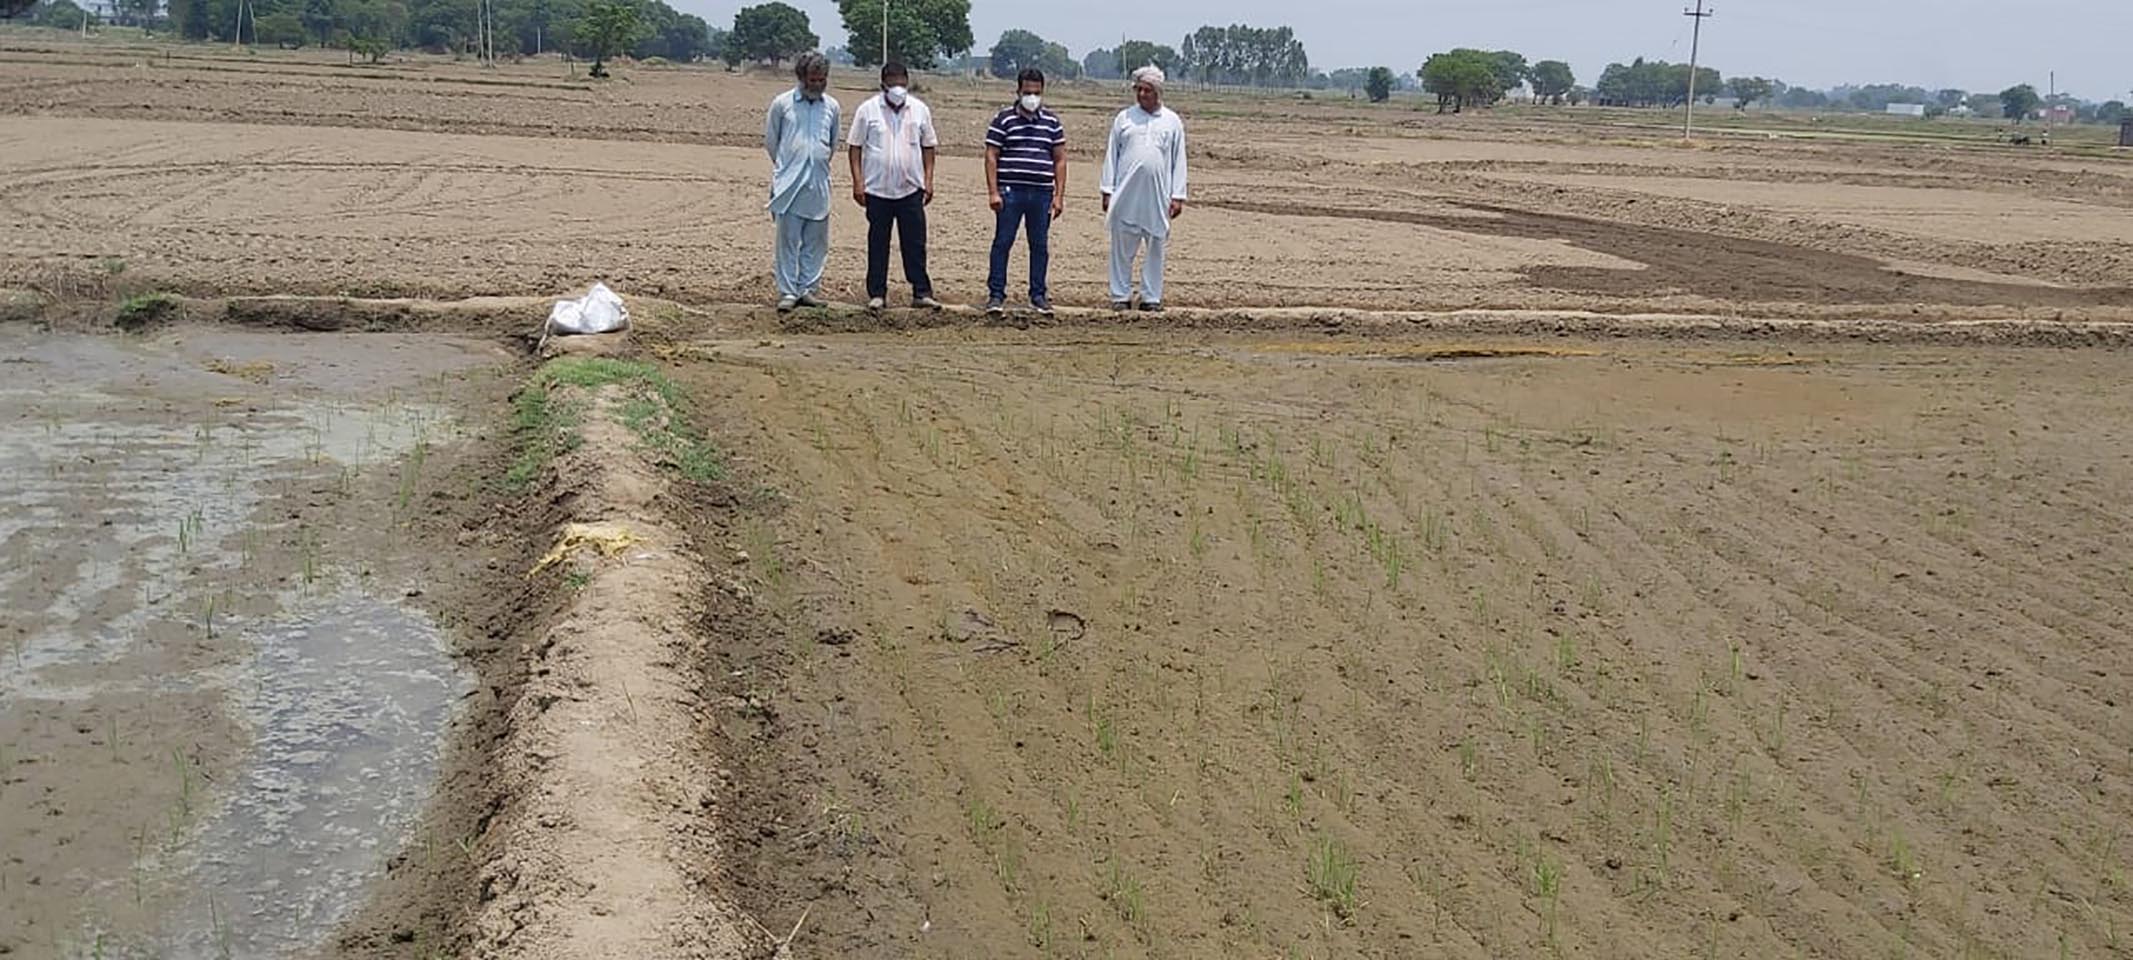 Haryana announces Rs 4,000 per acre incentive for farmers using new paddy sowing method